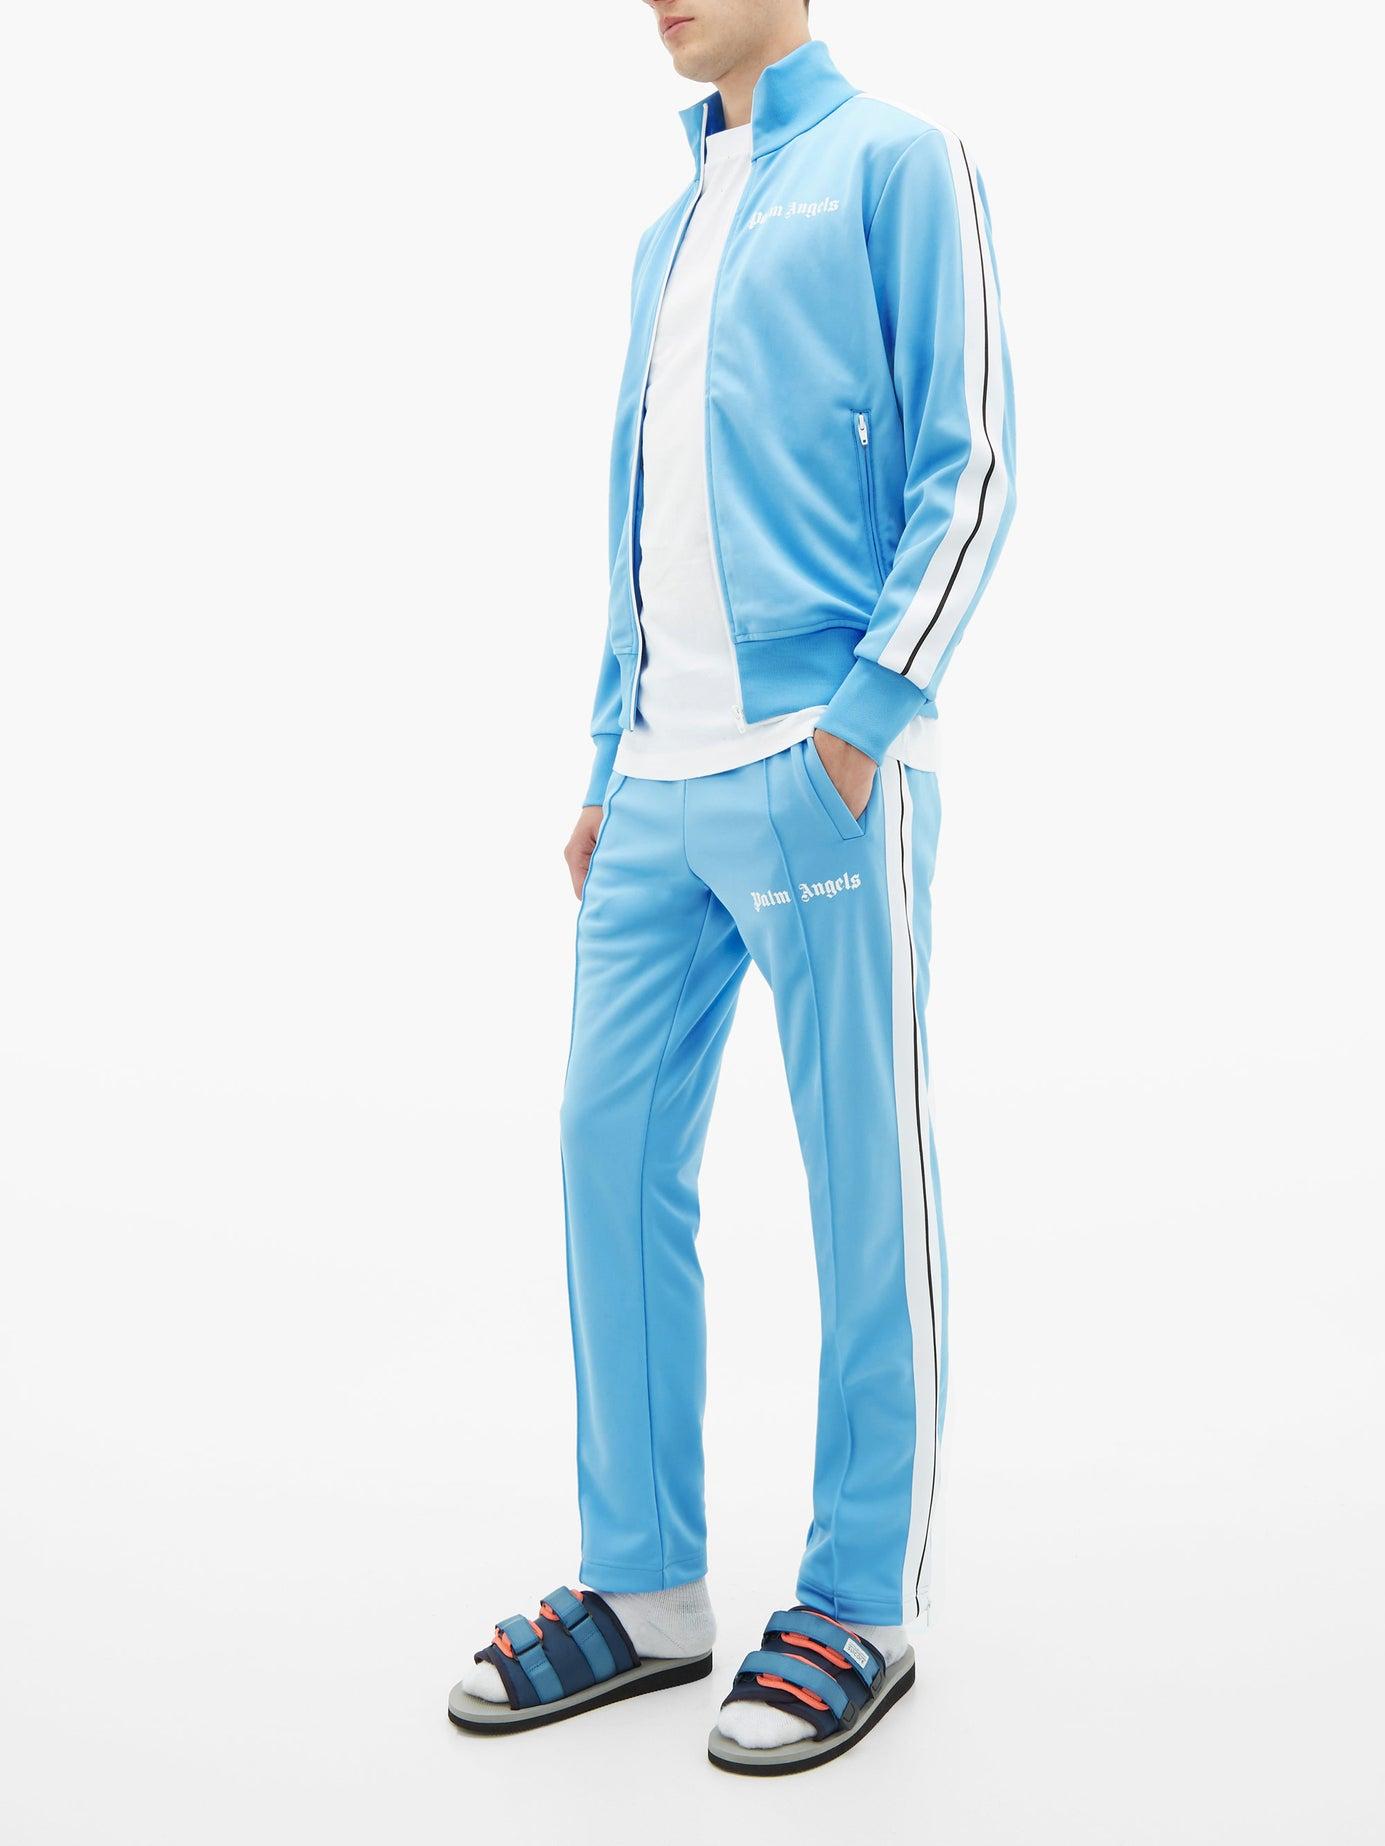 Palm angel - Activewear, Tracksuits